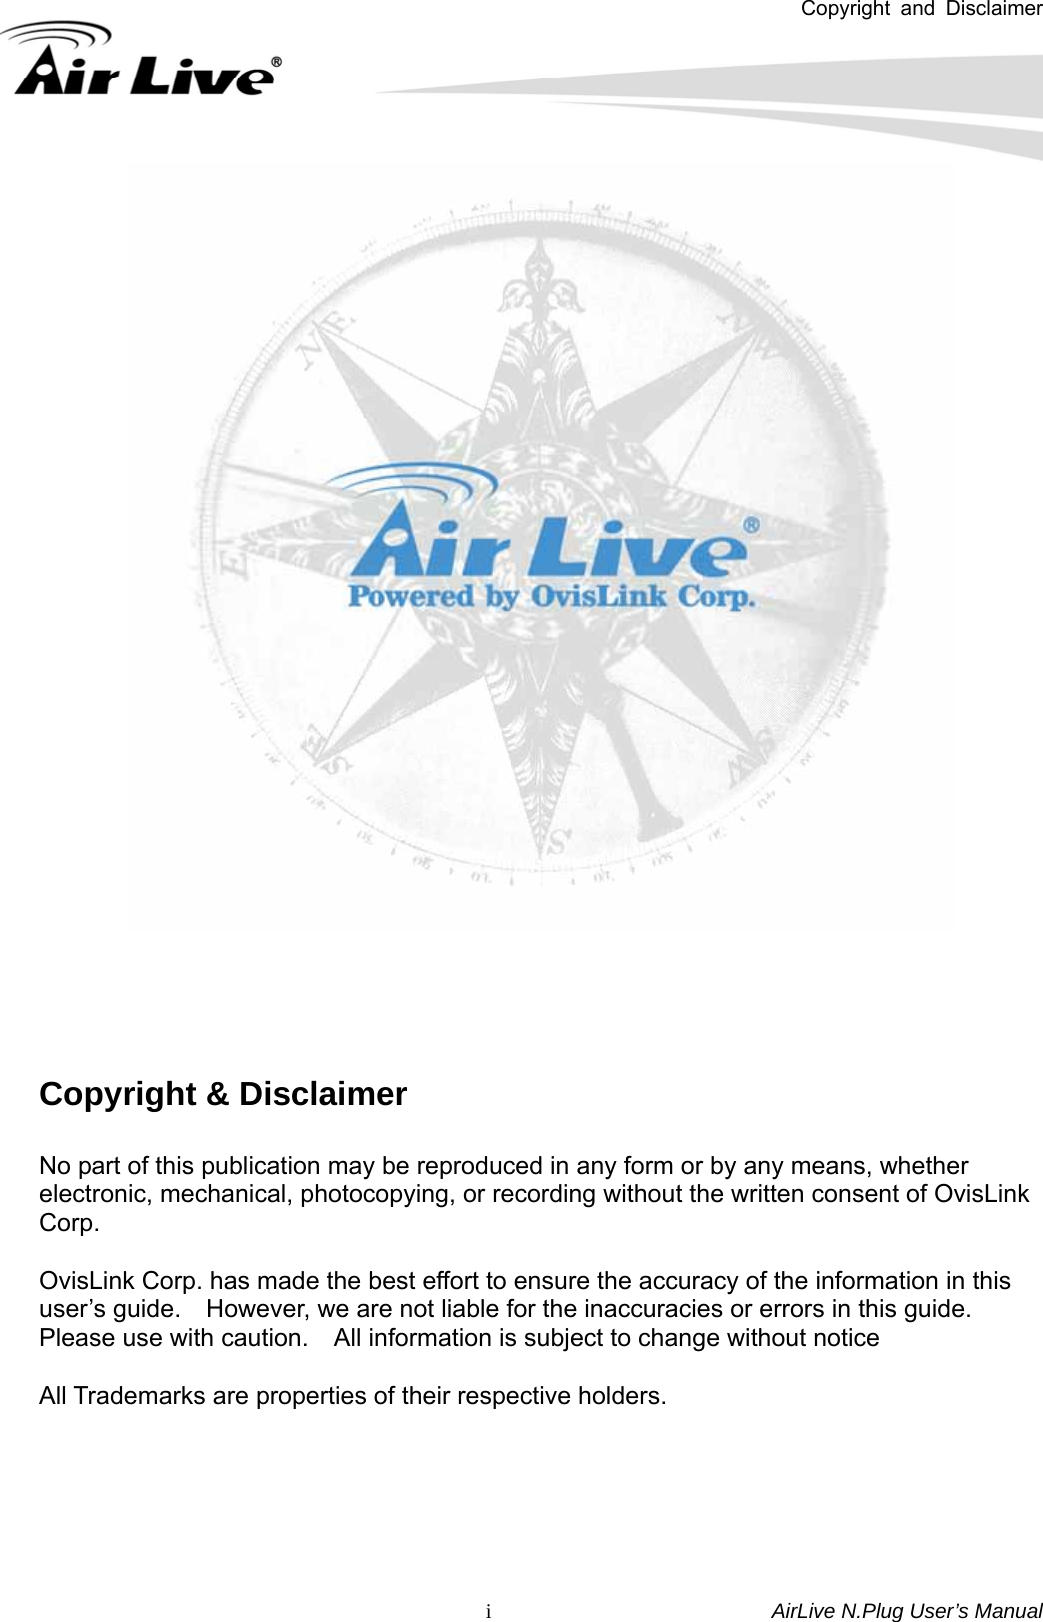 Copyright and Disclaimer       AirLive N.Plug User’s Manual  i      Copyright &amp; Disclaimer  No part of this publication may be reproduced in any form or by any means, whether electronic, mechanical, photocopying, or recording without the written consent of OvisLink Corp.   OvisLink Corp. has made the best effort to ensure the accuracy of the information in this user’s guide.    However, we are not liable for the inaccuracies or errors in this guide.   Please use with caution.    All information is subject to change without notice  All Trademarks are properties of their respective holders.     